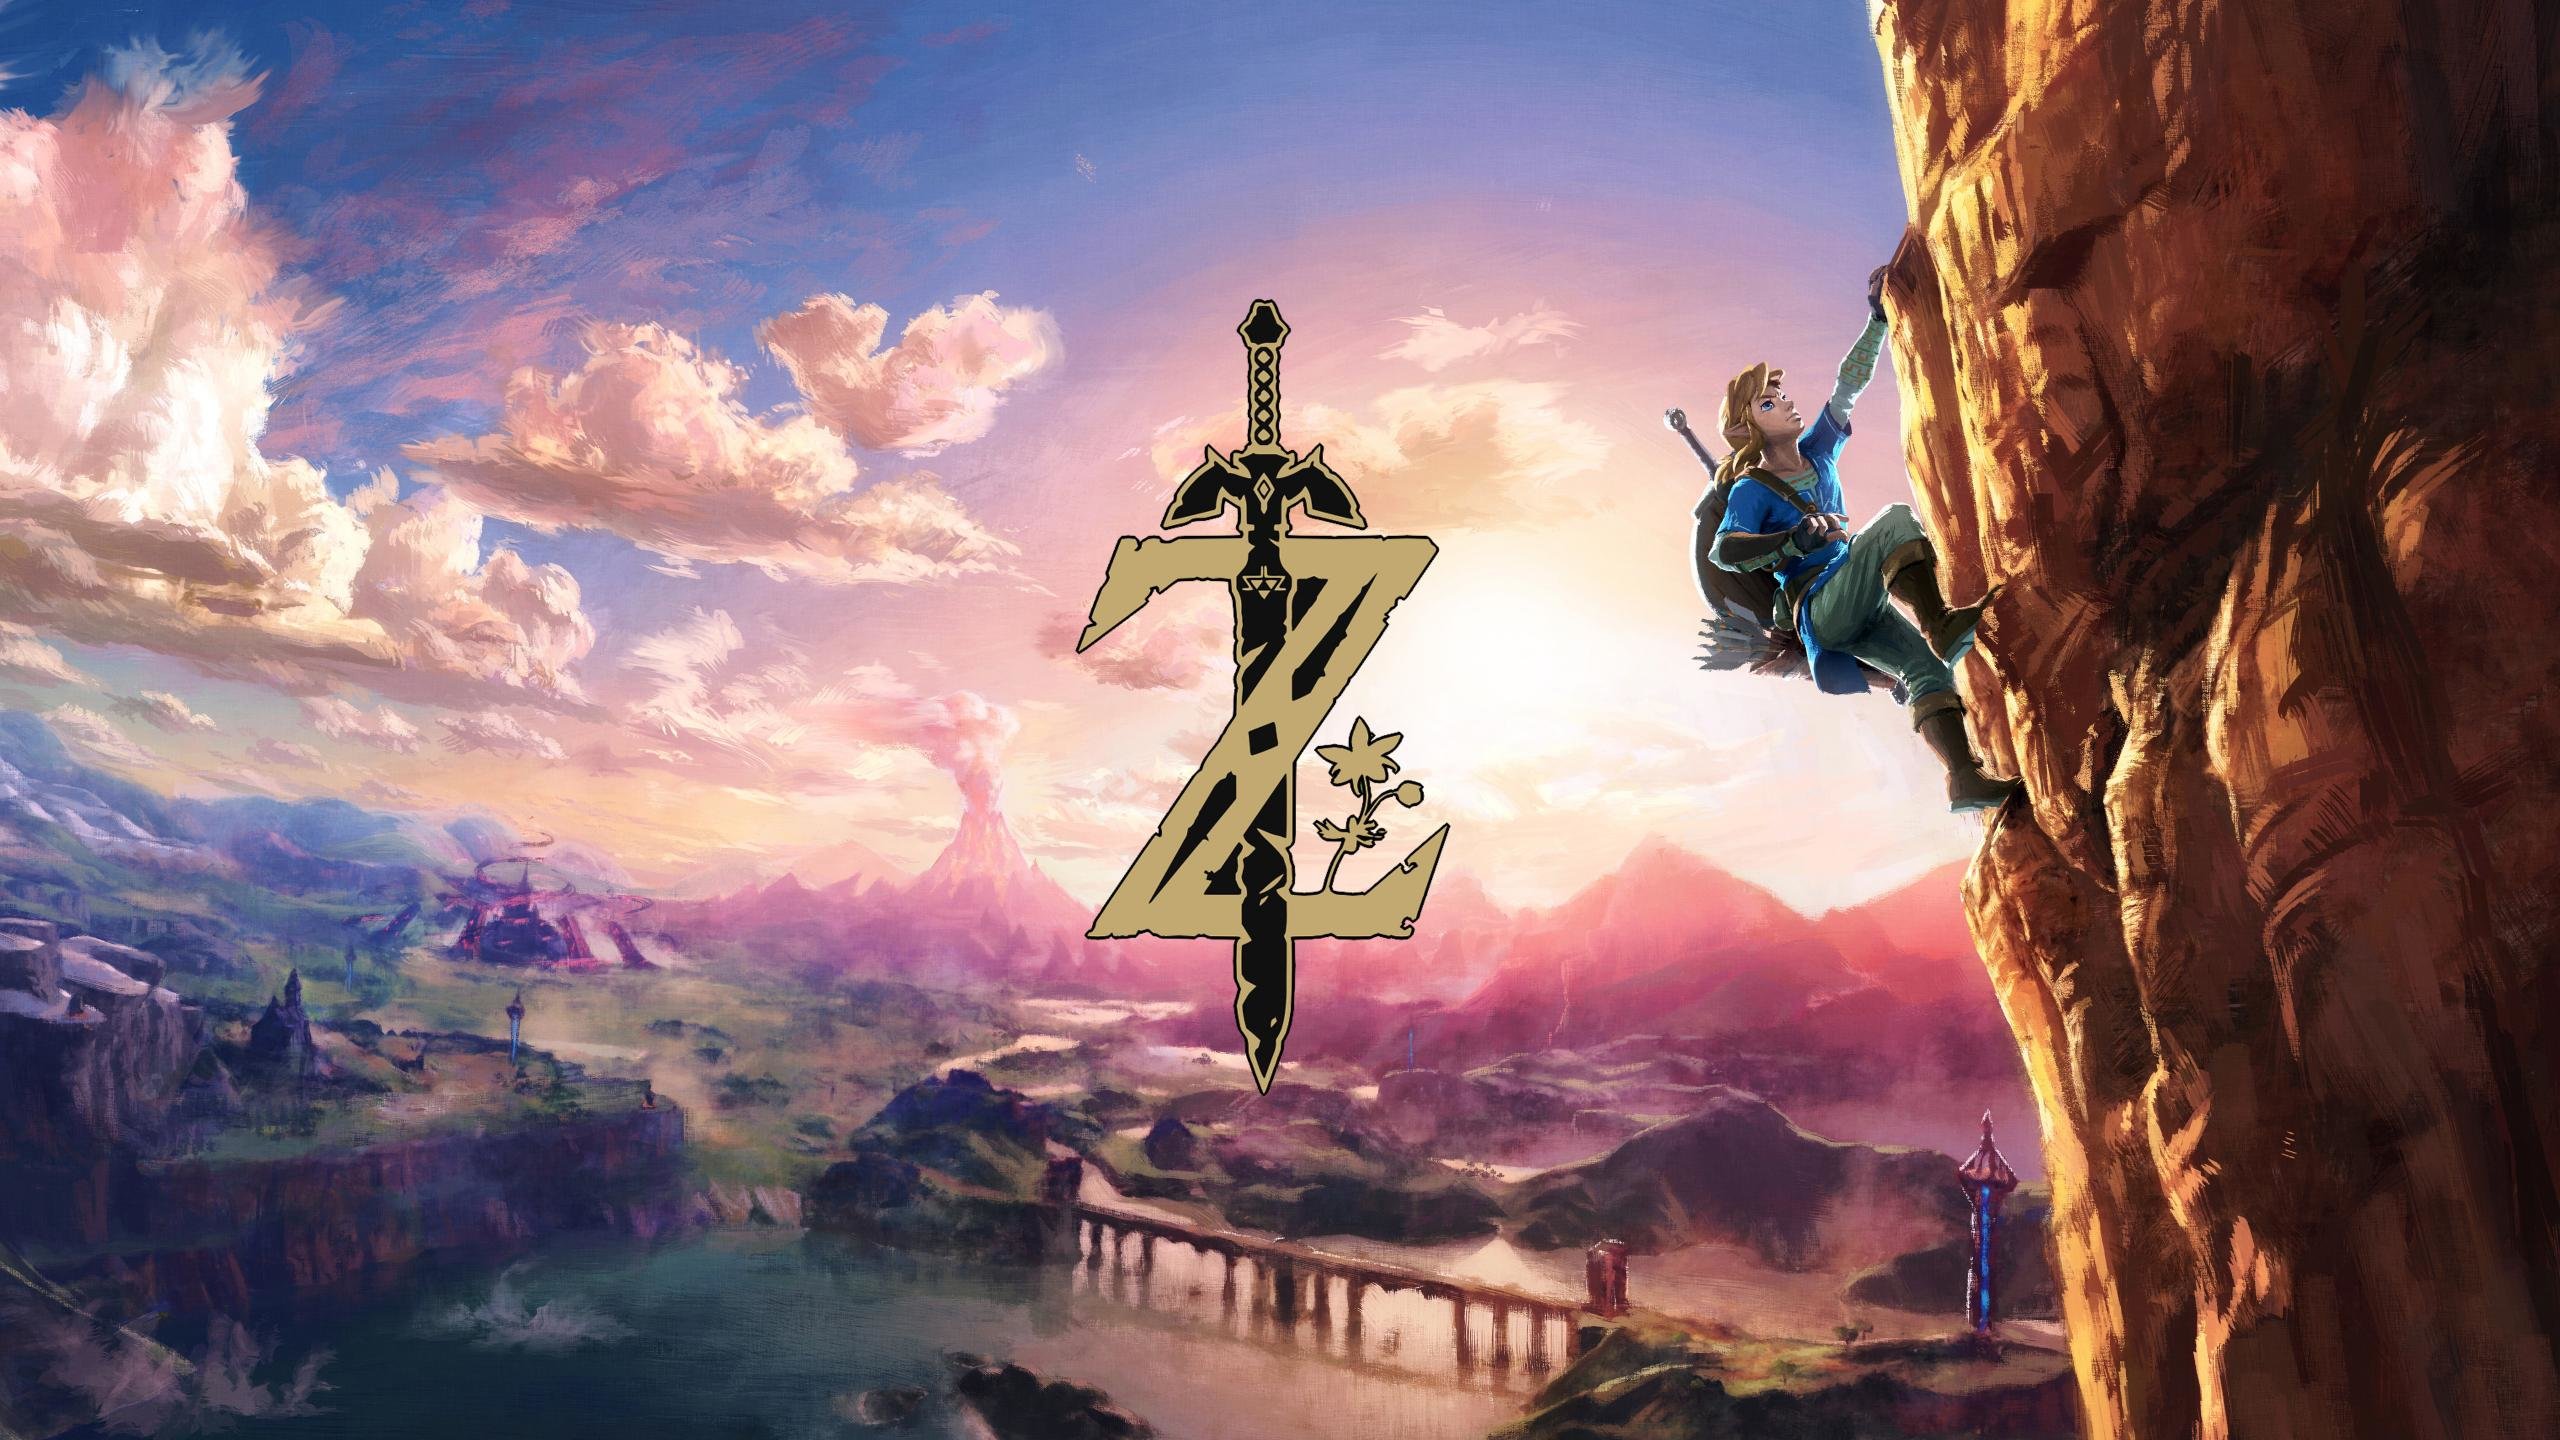 Awesome The Legend Of Zelda: Breath Of The Wild free wallpaper ID:111510 for hd 2560x1440 PC